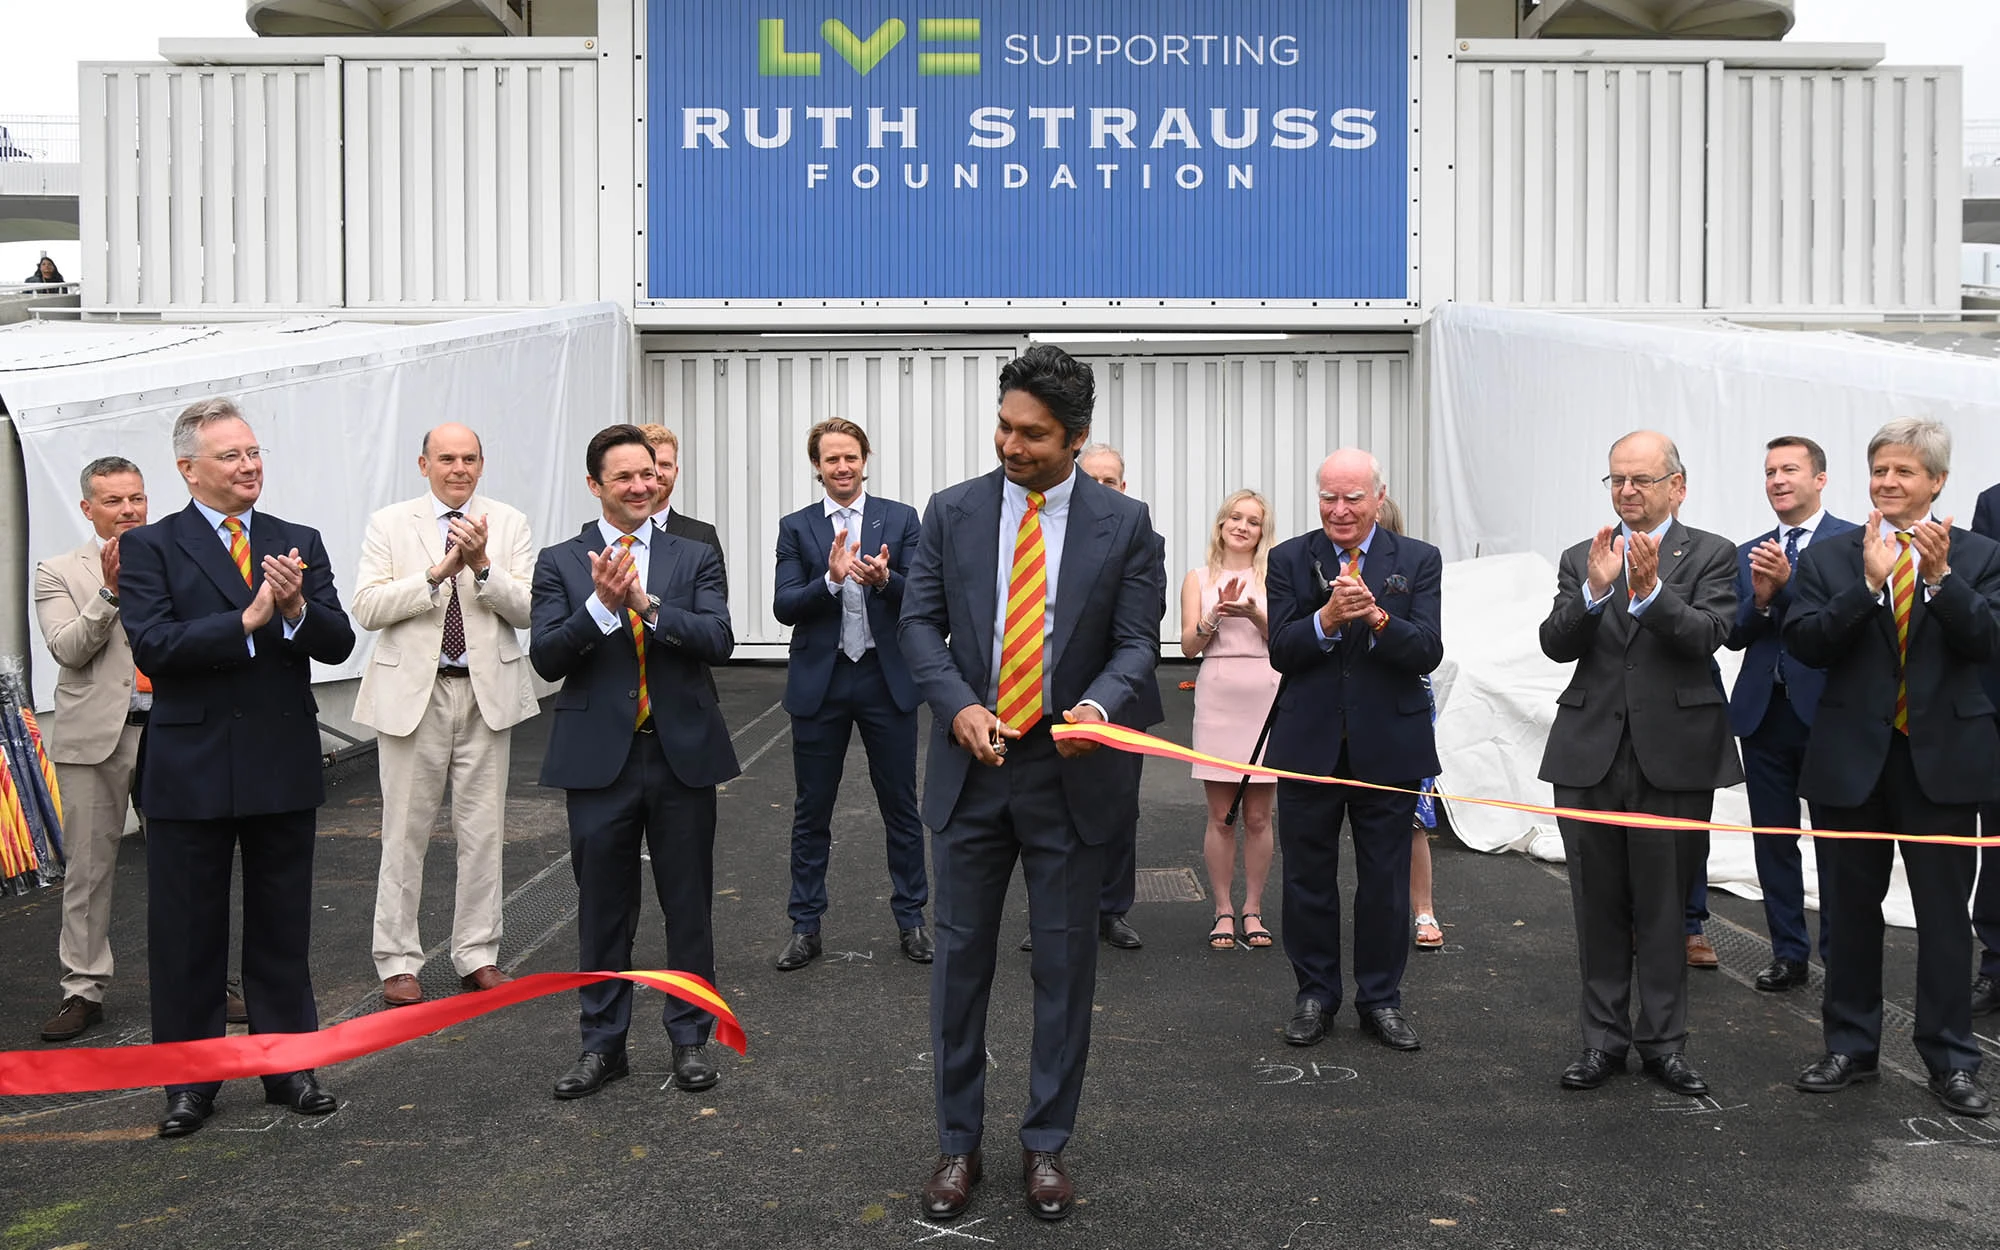 ribbon cutting at lord's cricket ground